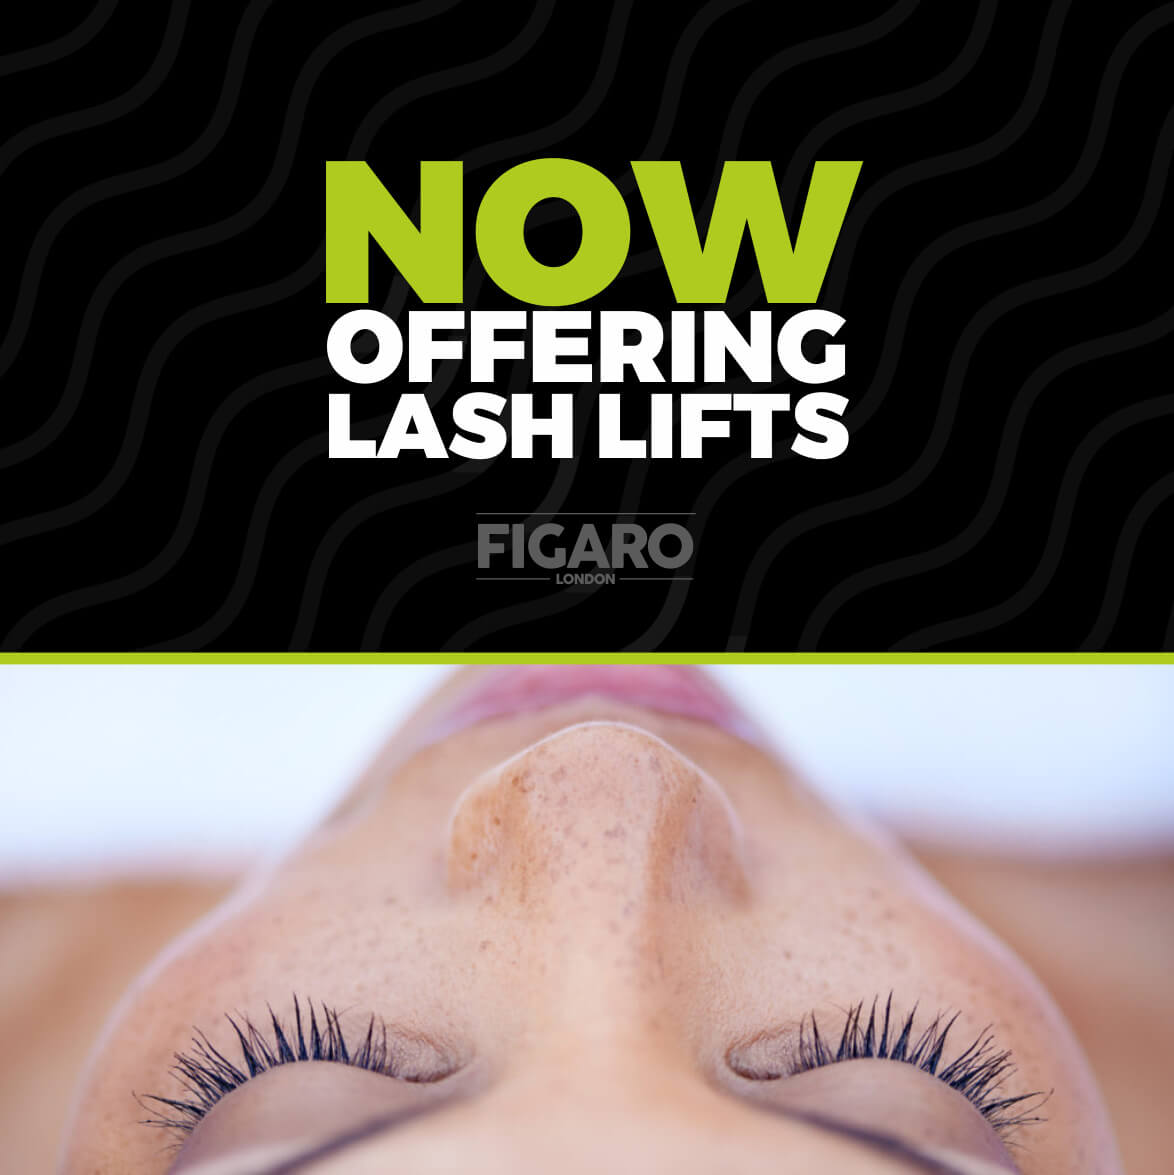 Now offering Lash Lifts